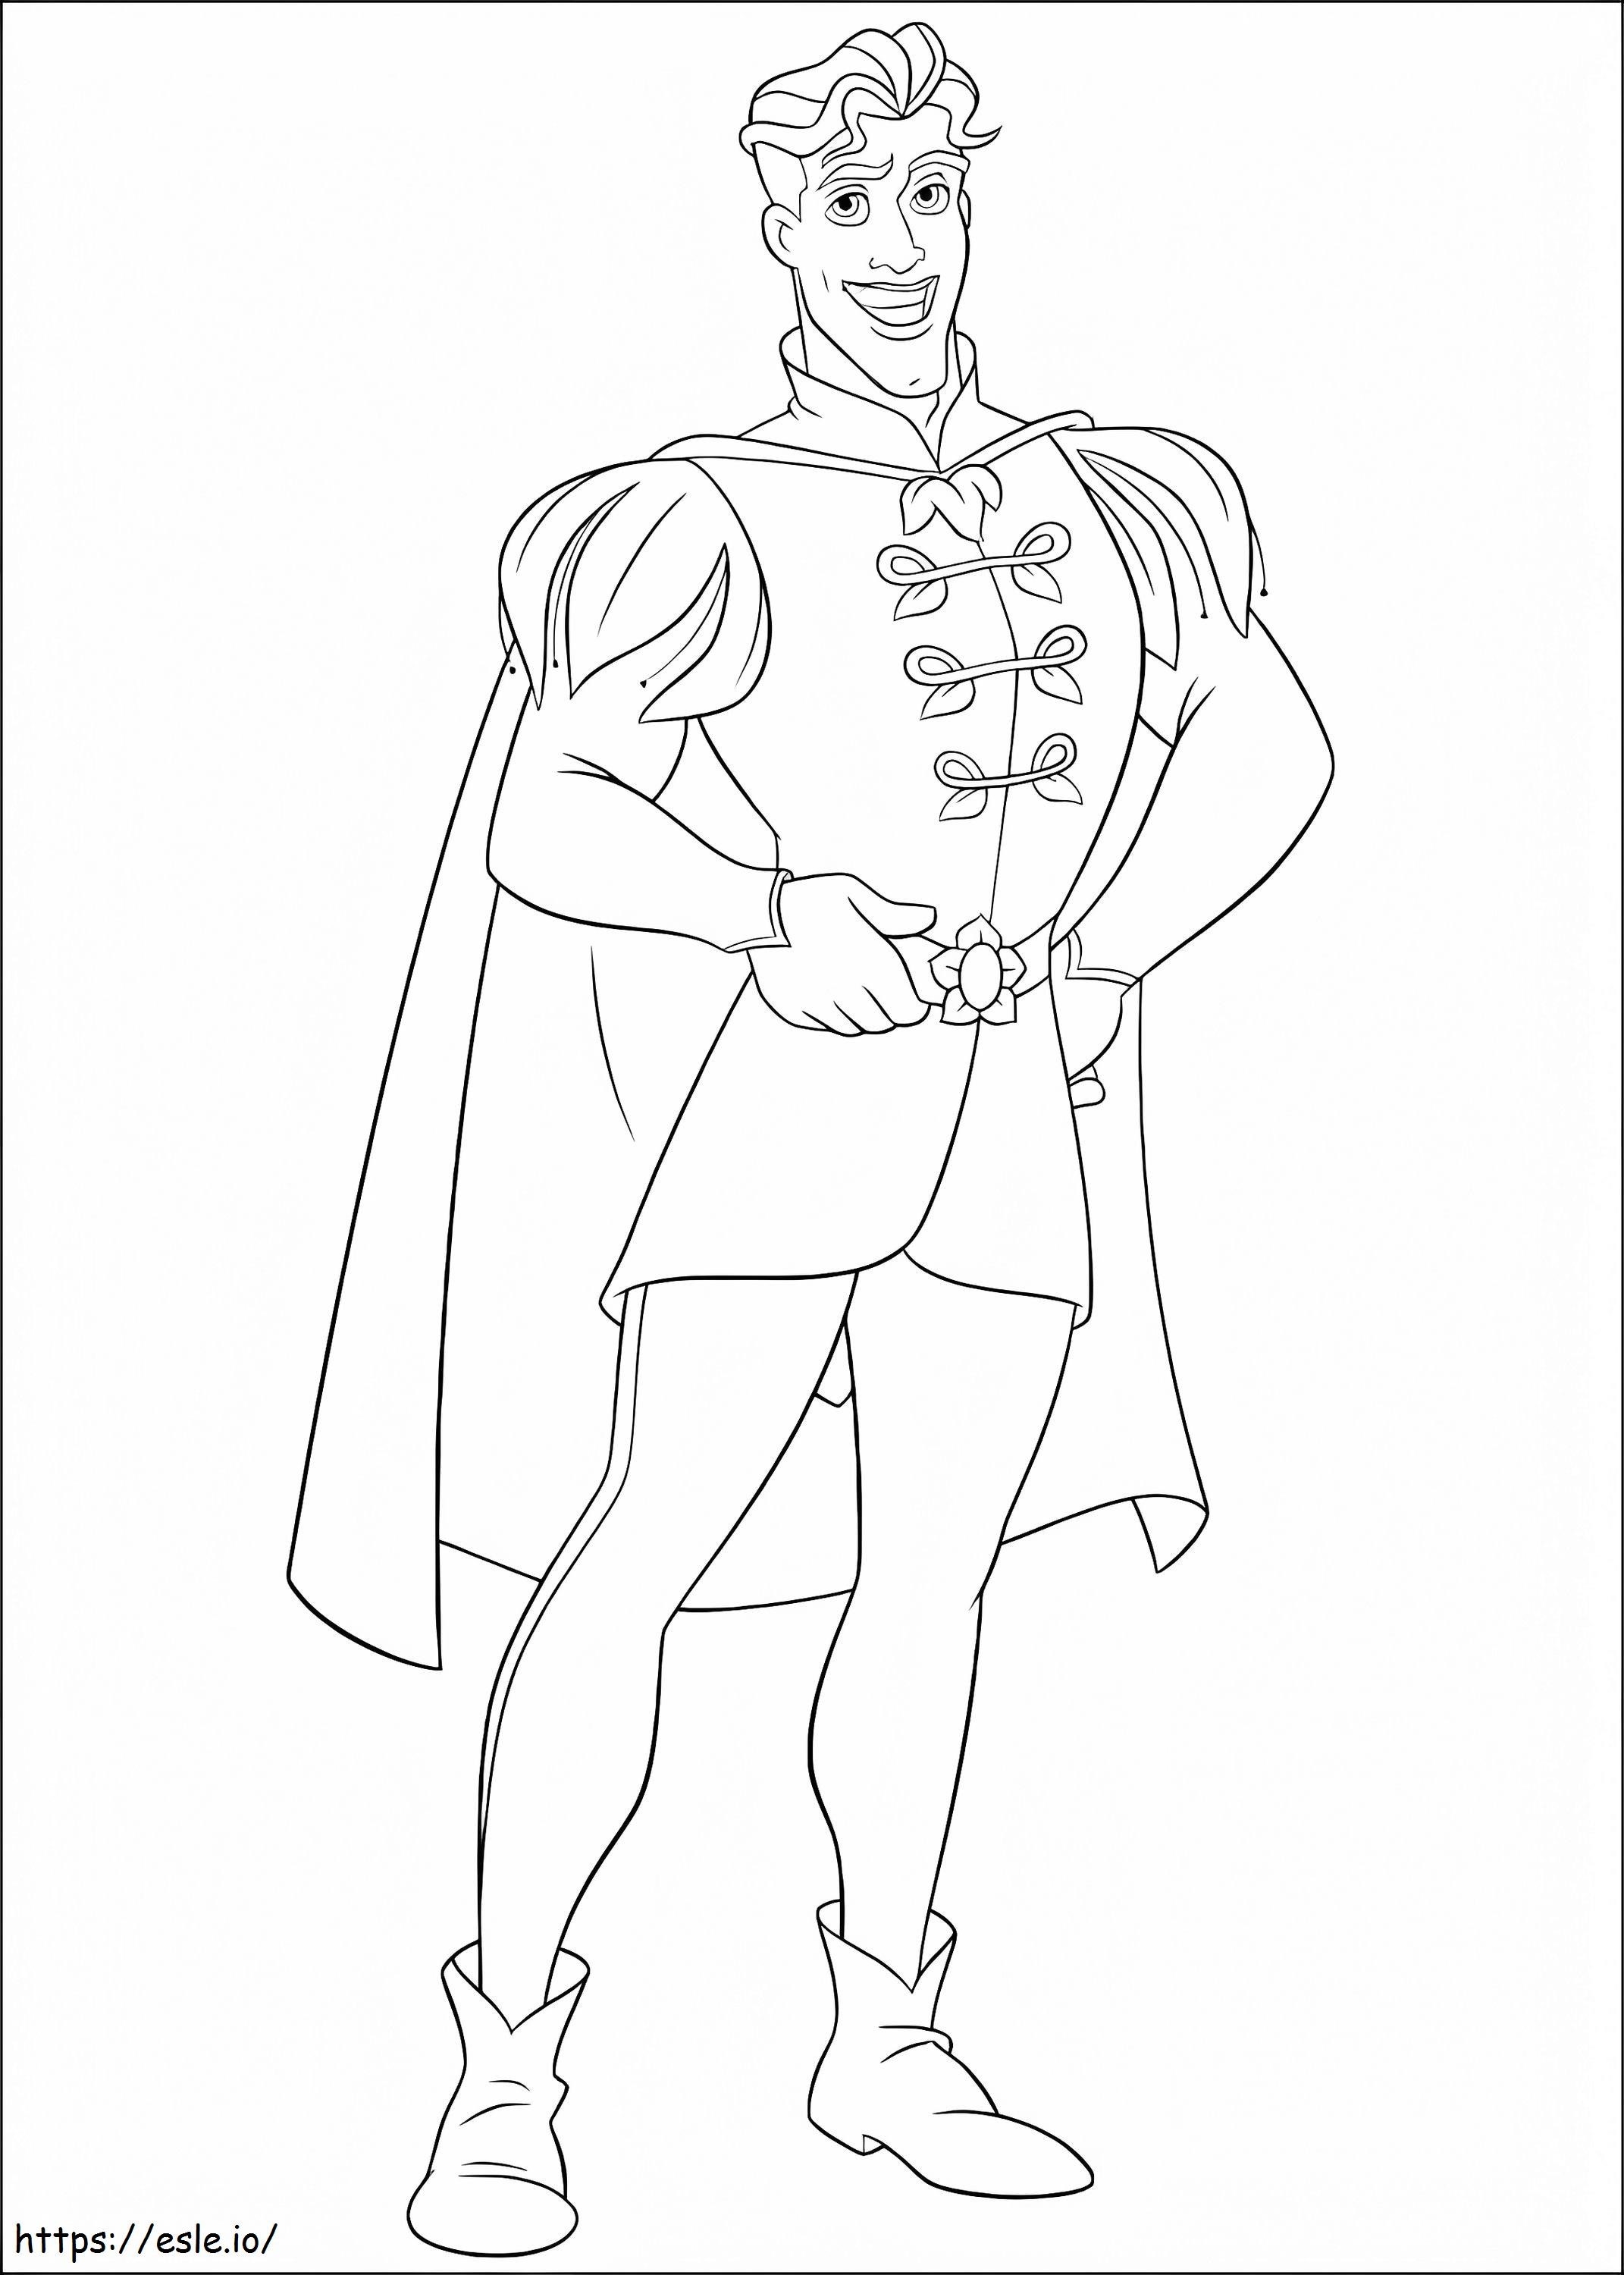 Prince Naveen From Princess And The Frog coloring page